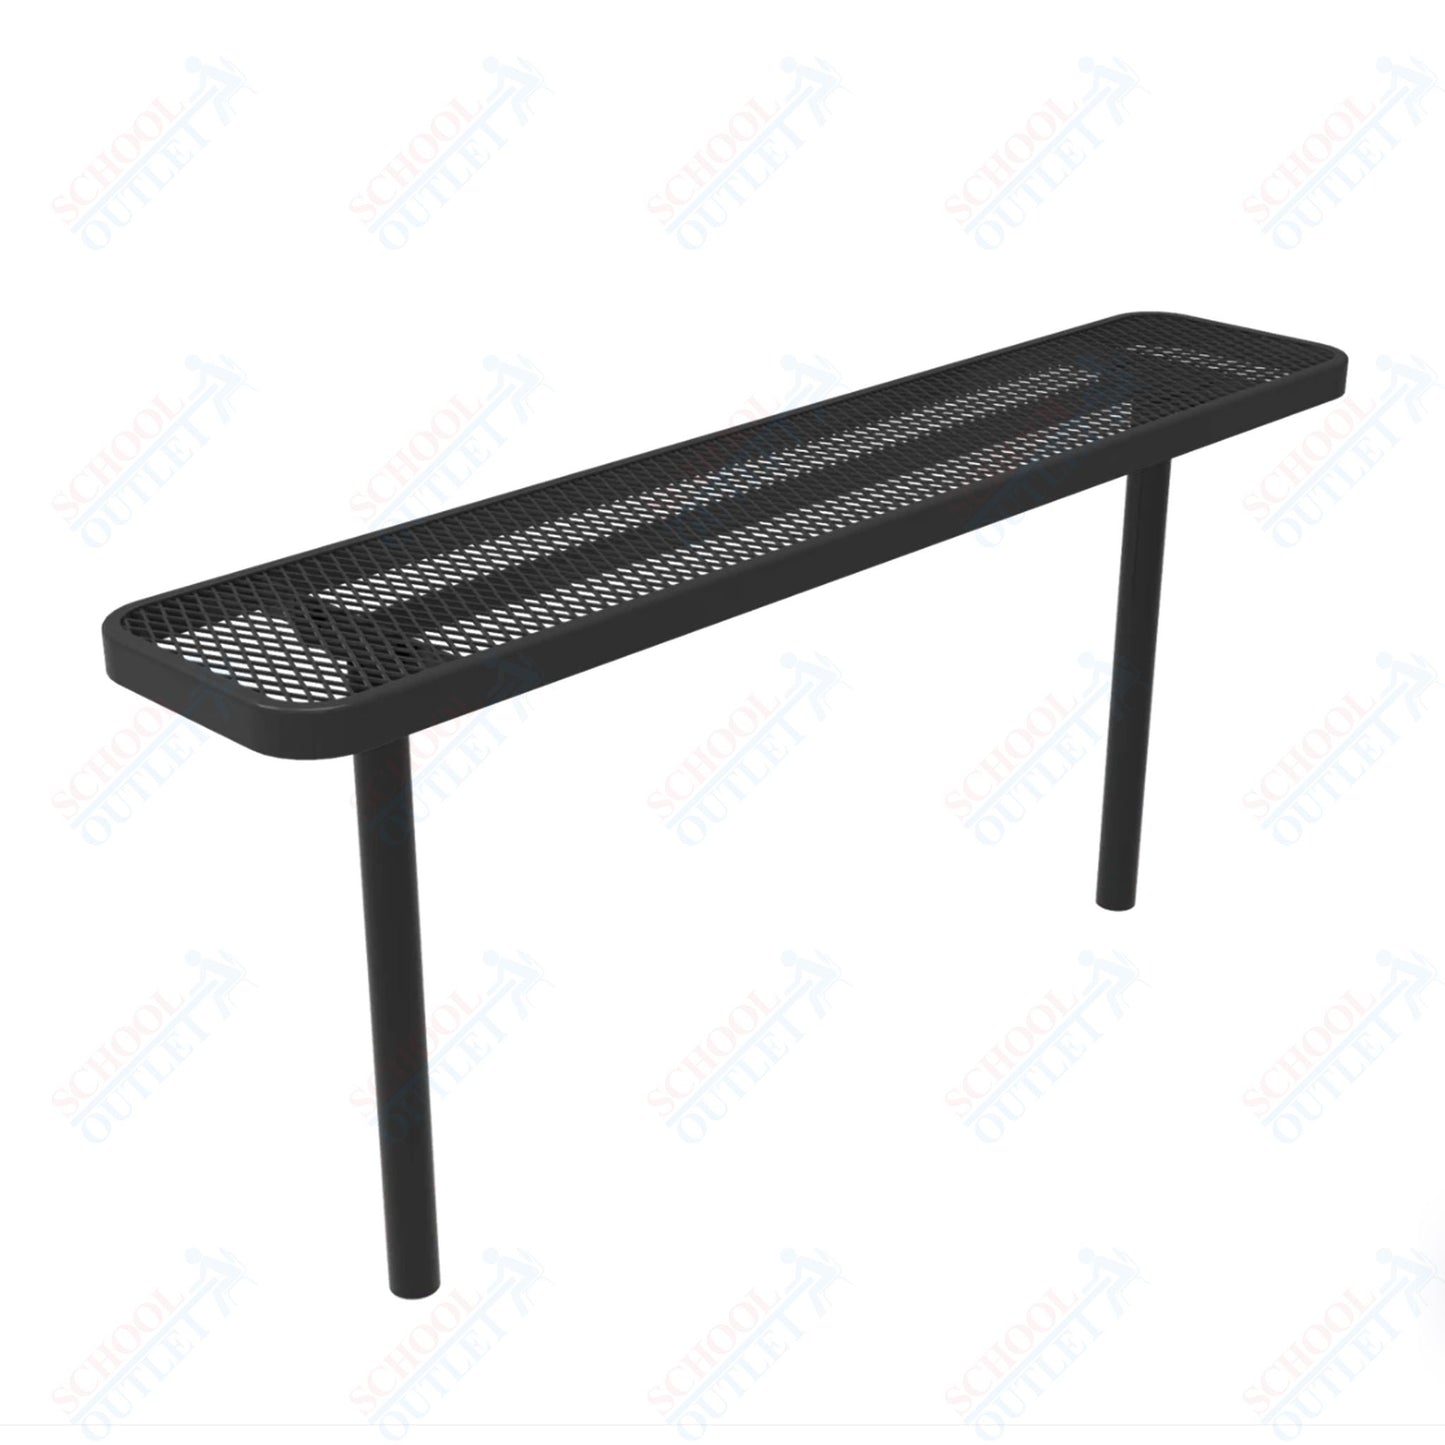 MyTcoat - Player's Outdoor Bench without Back - Inground Mount 4' L (MYT-BPY04-34)